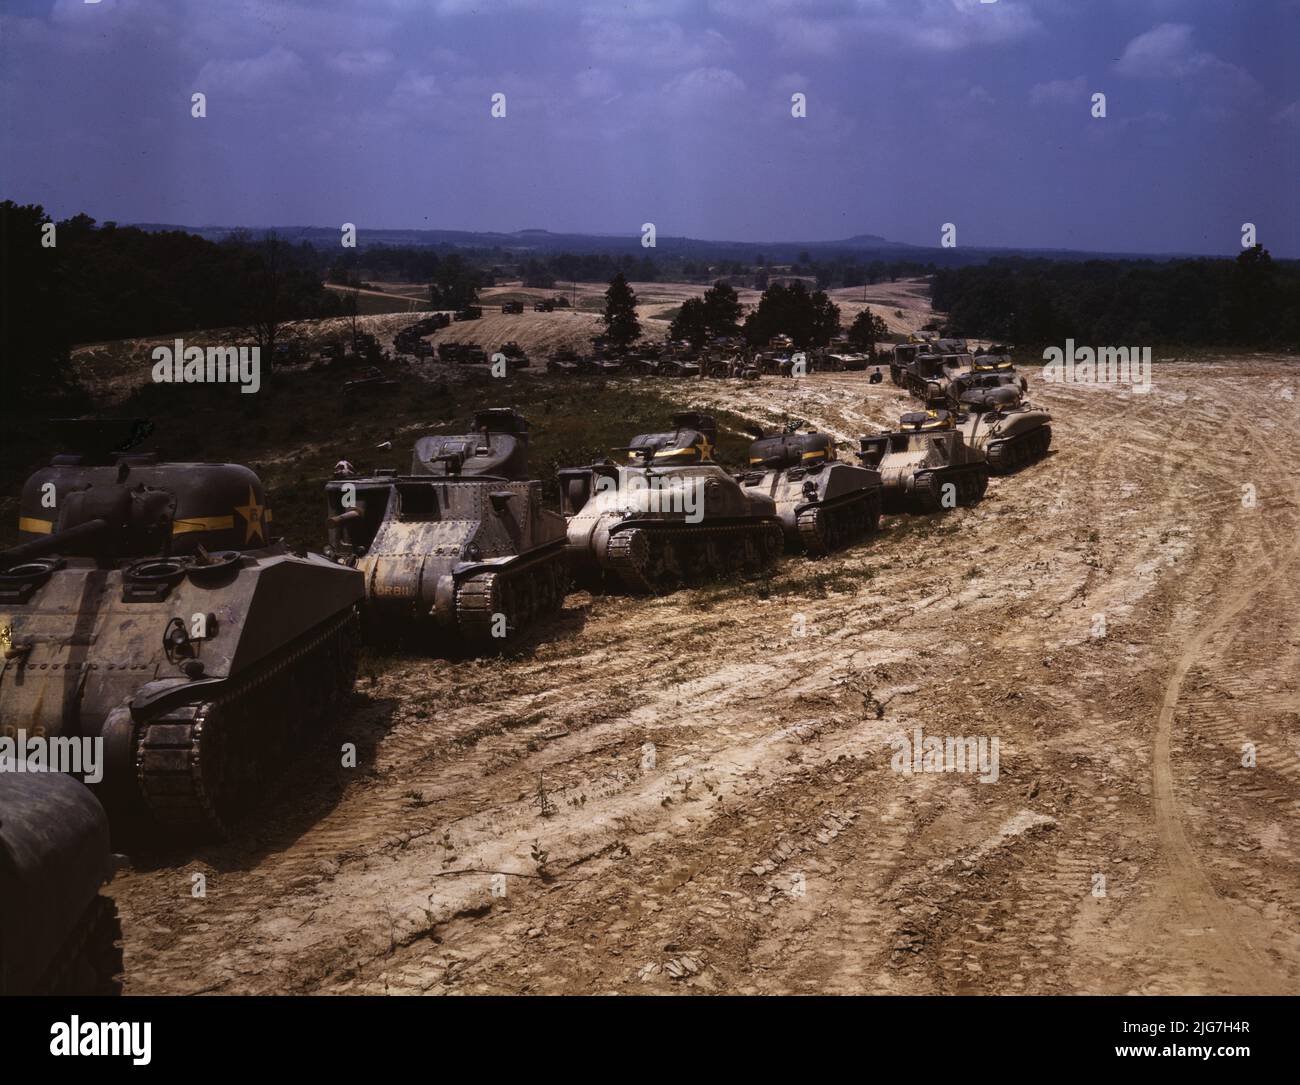 Parade of M-4 (General Sherman) and M-3 (General Grant) tanks in training maneuvers, Ft. Knox, Ky. Note the lower design of the M-4, the larger gun in the turret and the two hatches in front of the turret. Stock Photo